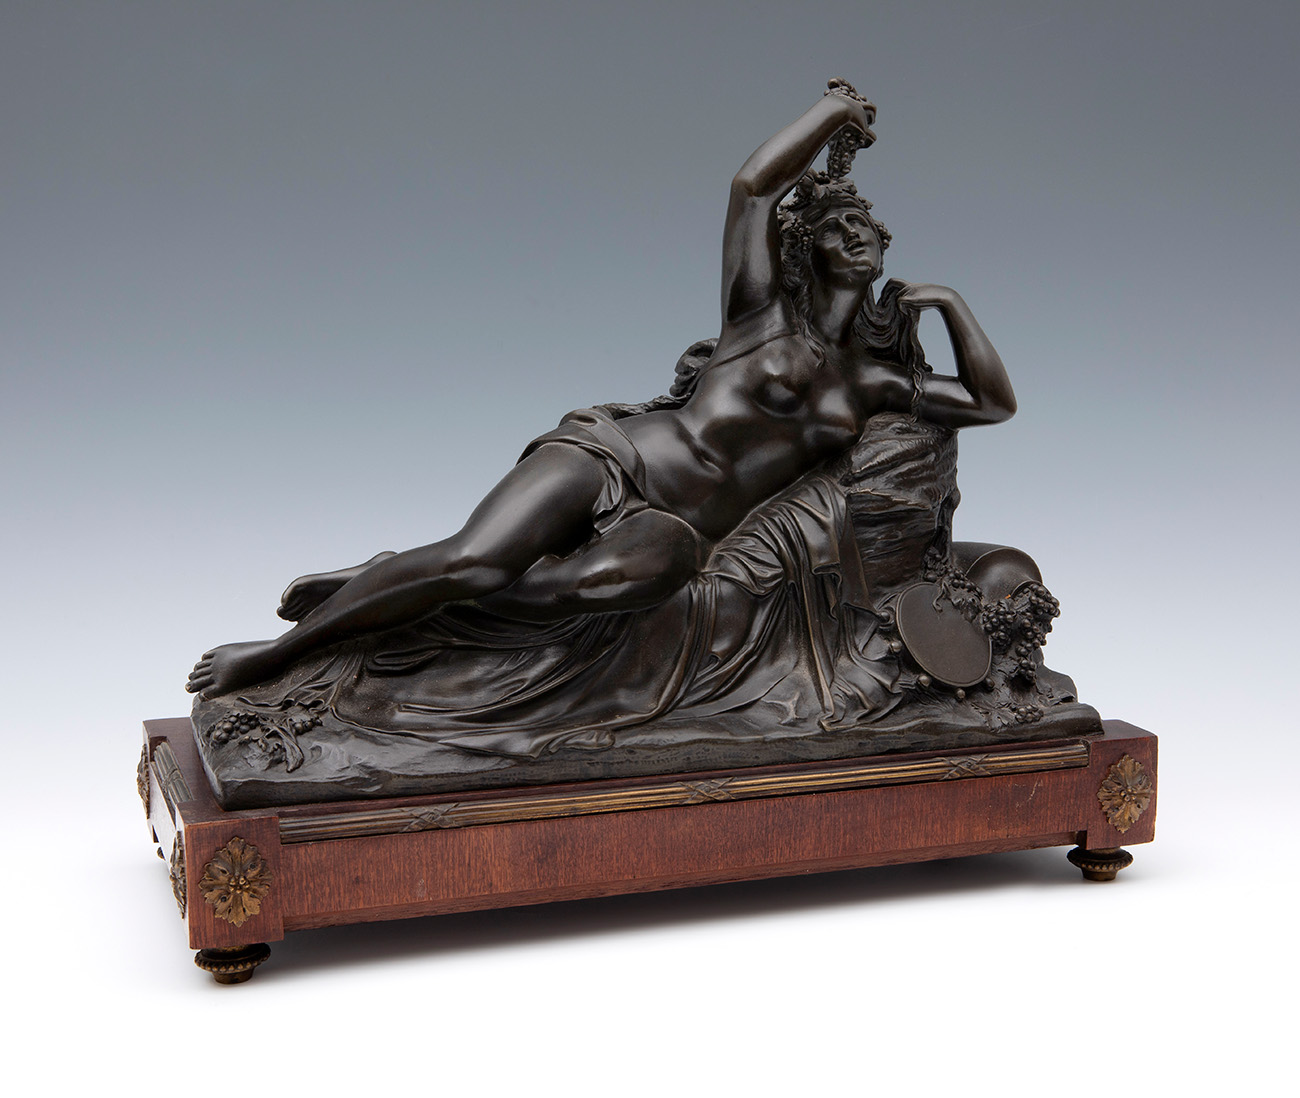 French or Italian school, mid-19th century."Allegory of Autumn".Patinated bronze. Wooden base.